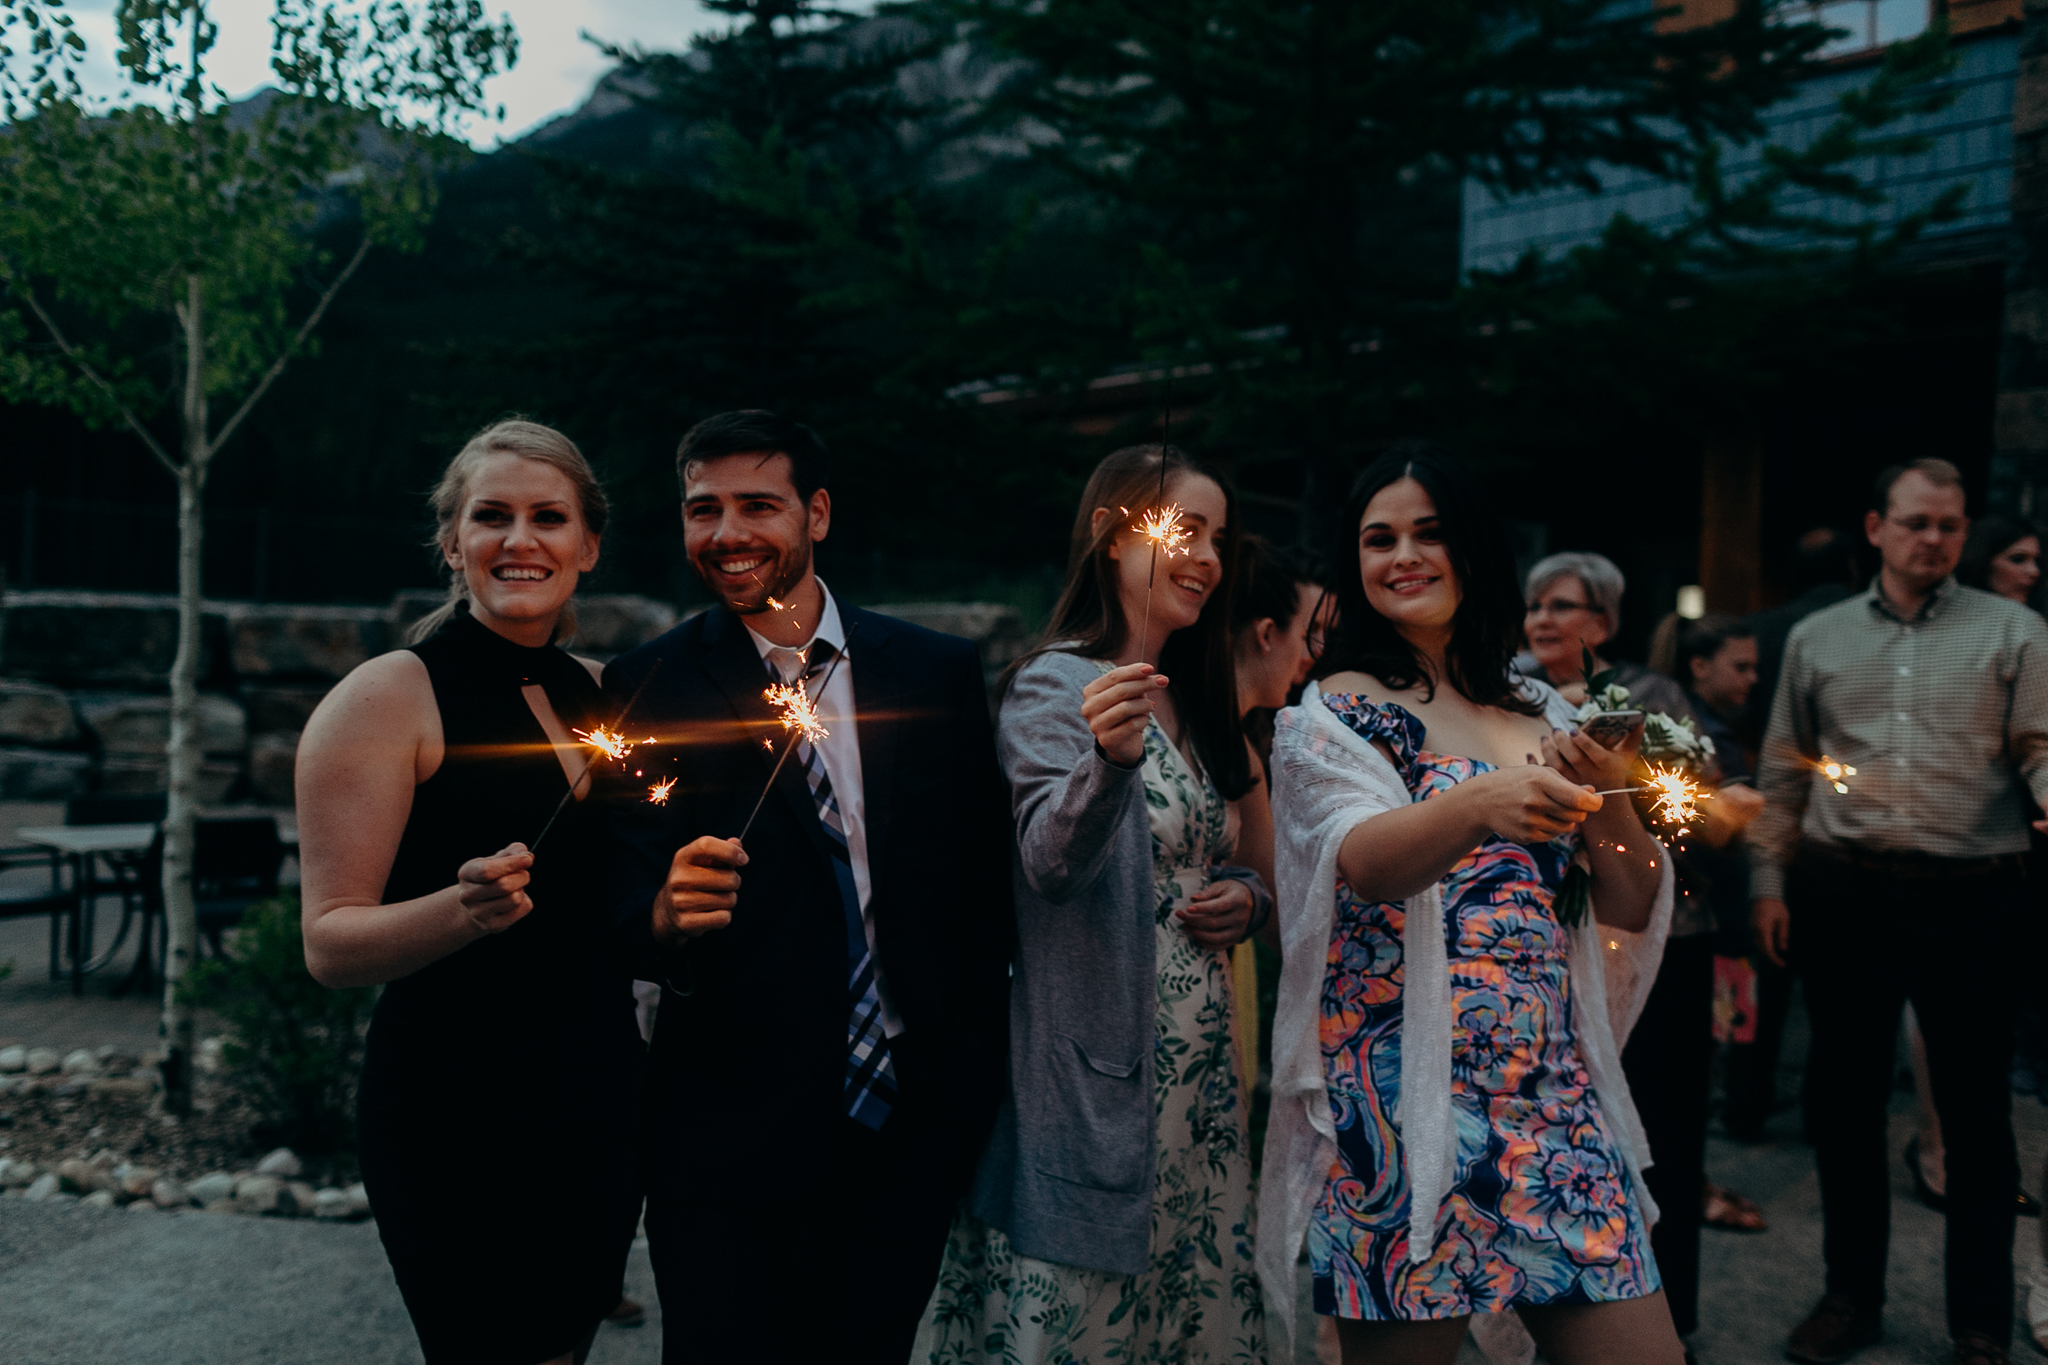 Wedding guests with sparklers